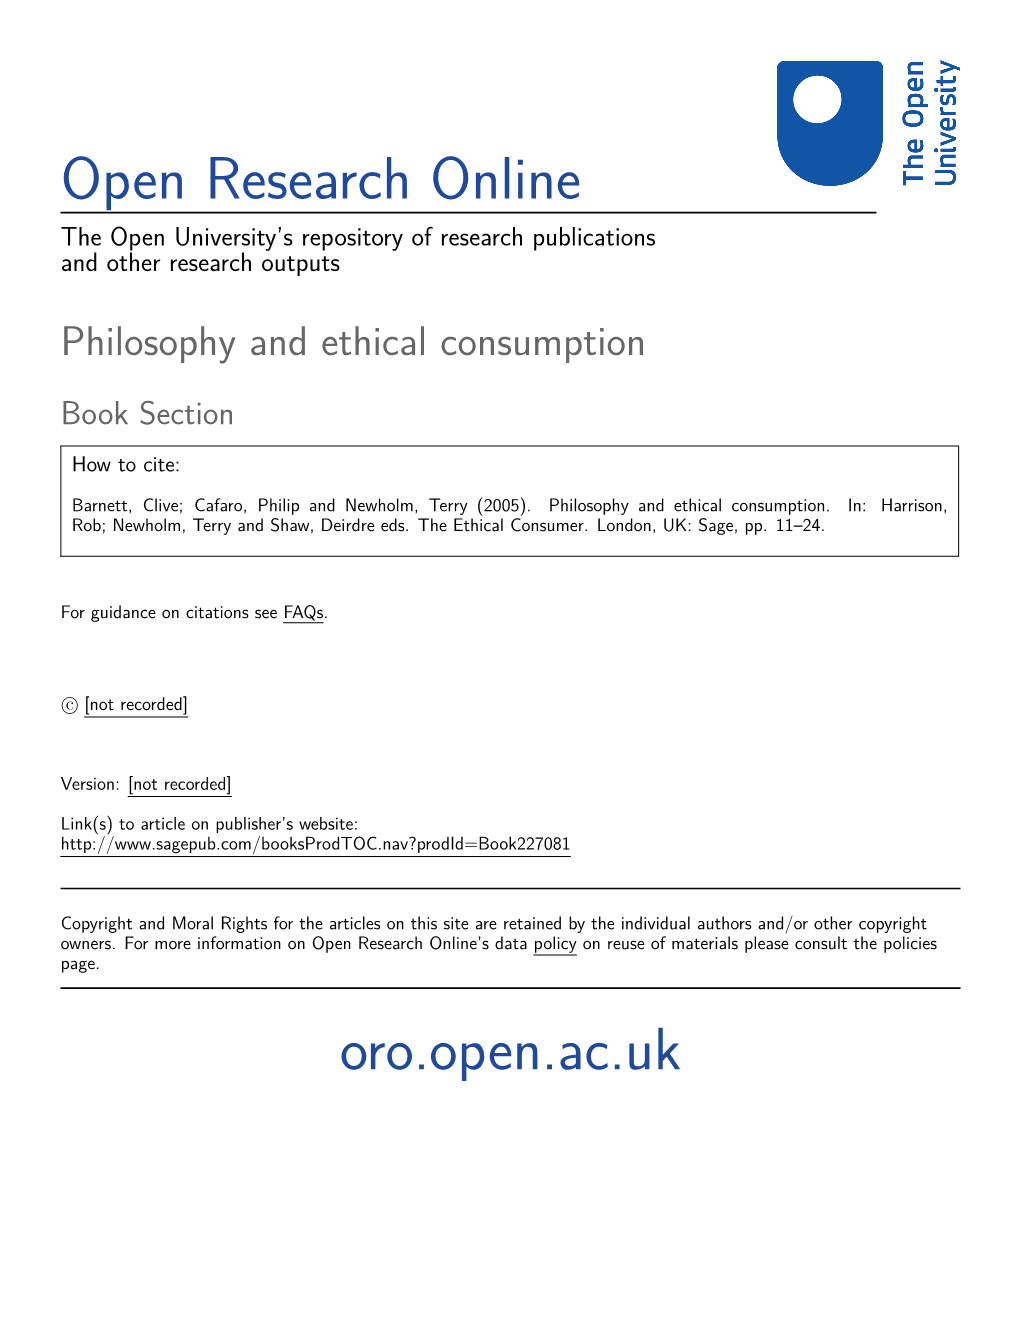 Philosophy and Ethical Consumption